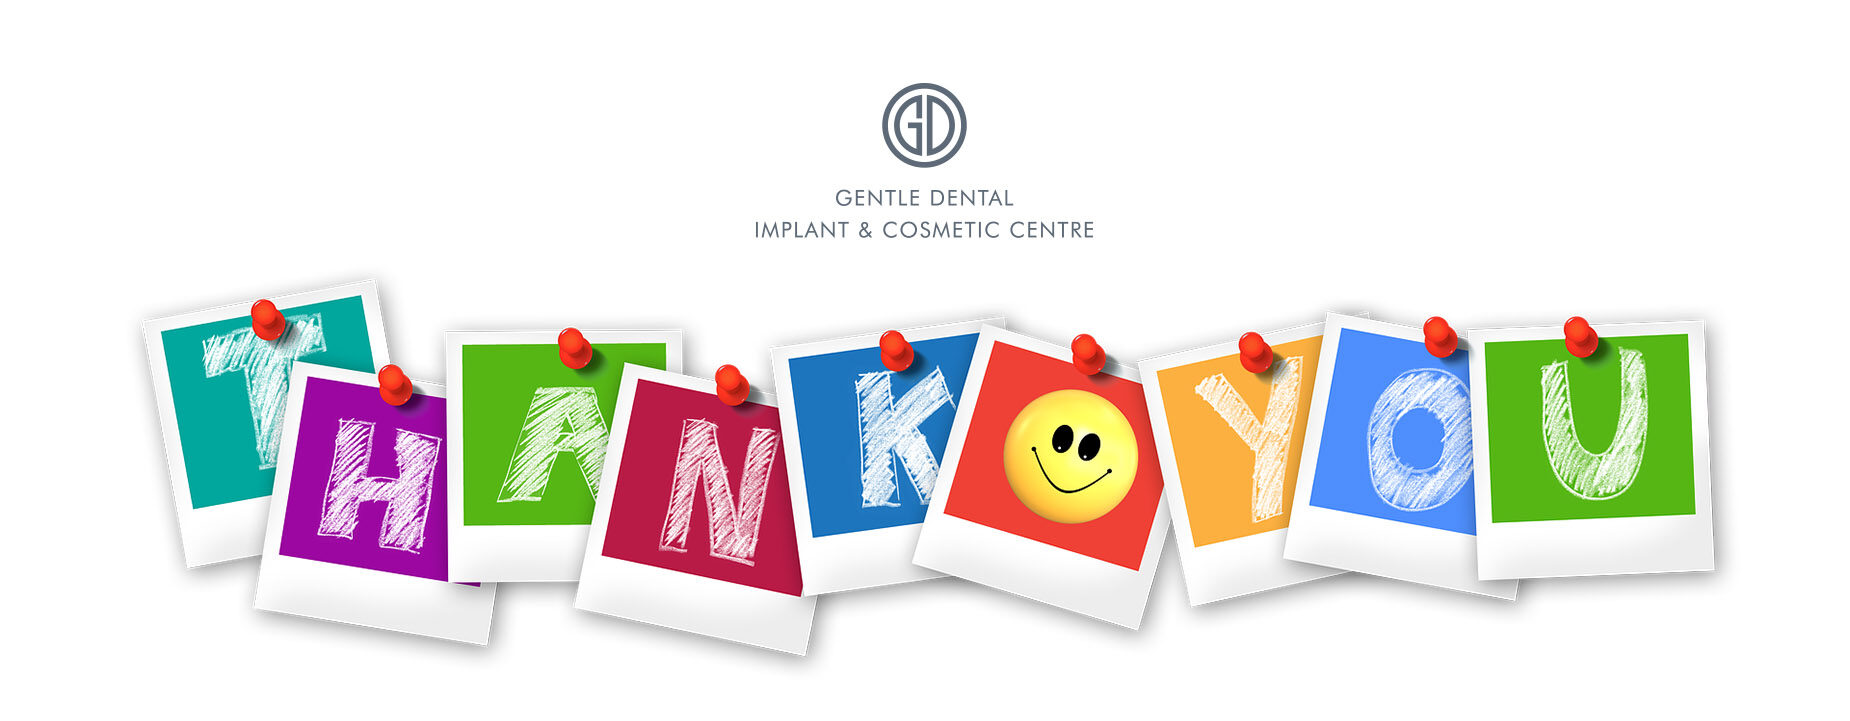 thank you for contacting one of our cosmetic dentists